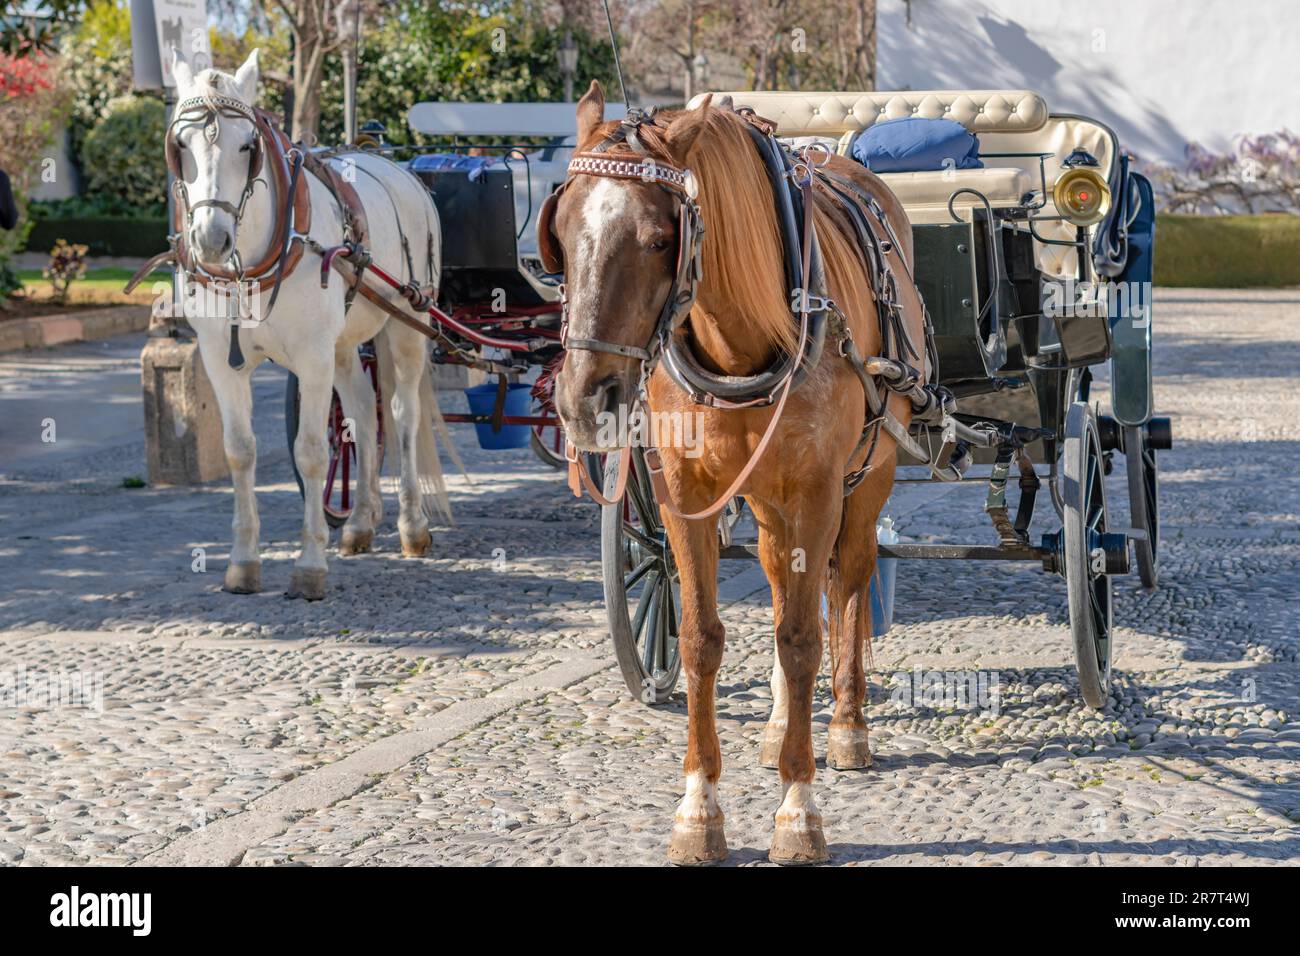 Ronda, malaga, spain Two horses, brown and white with their elegant carriages waiting for the arrival of tourists to visit the city Stock Photo